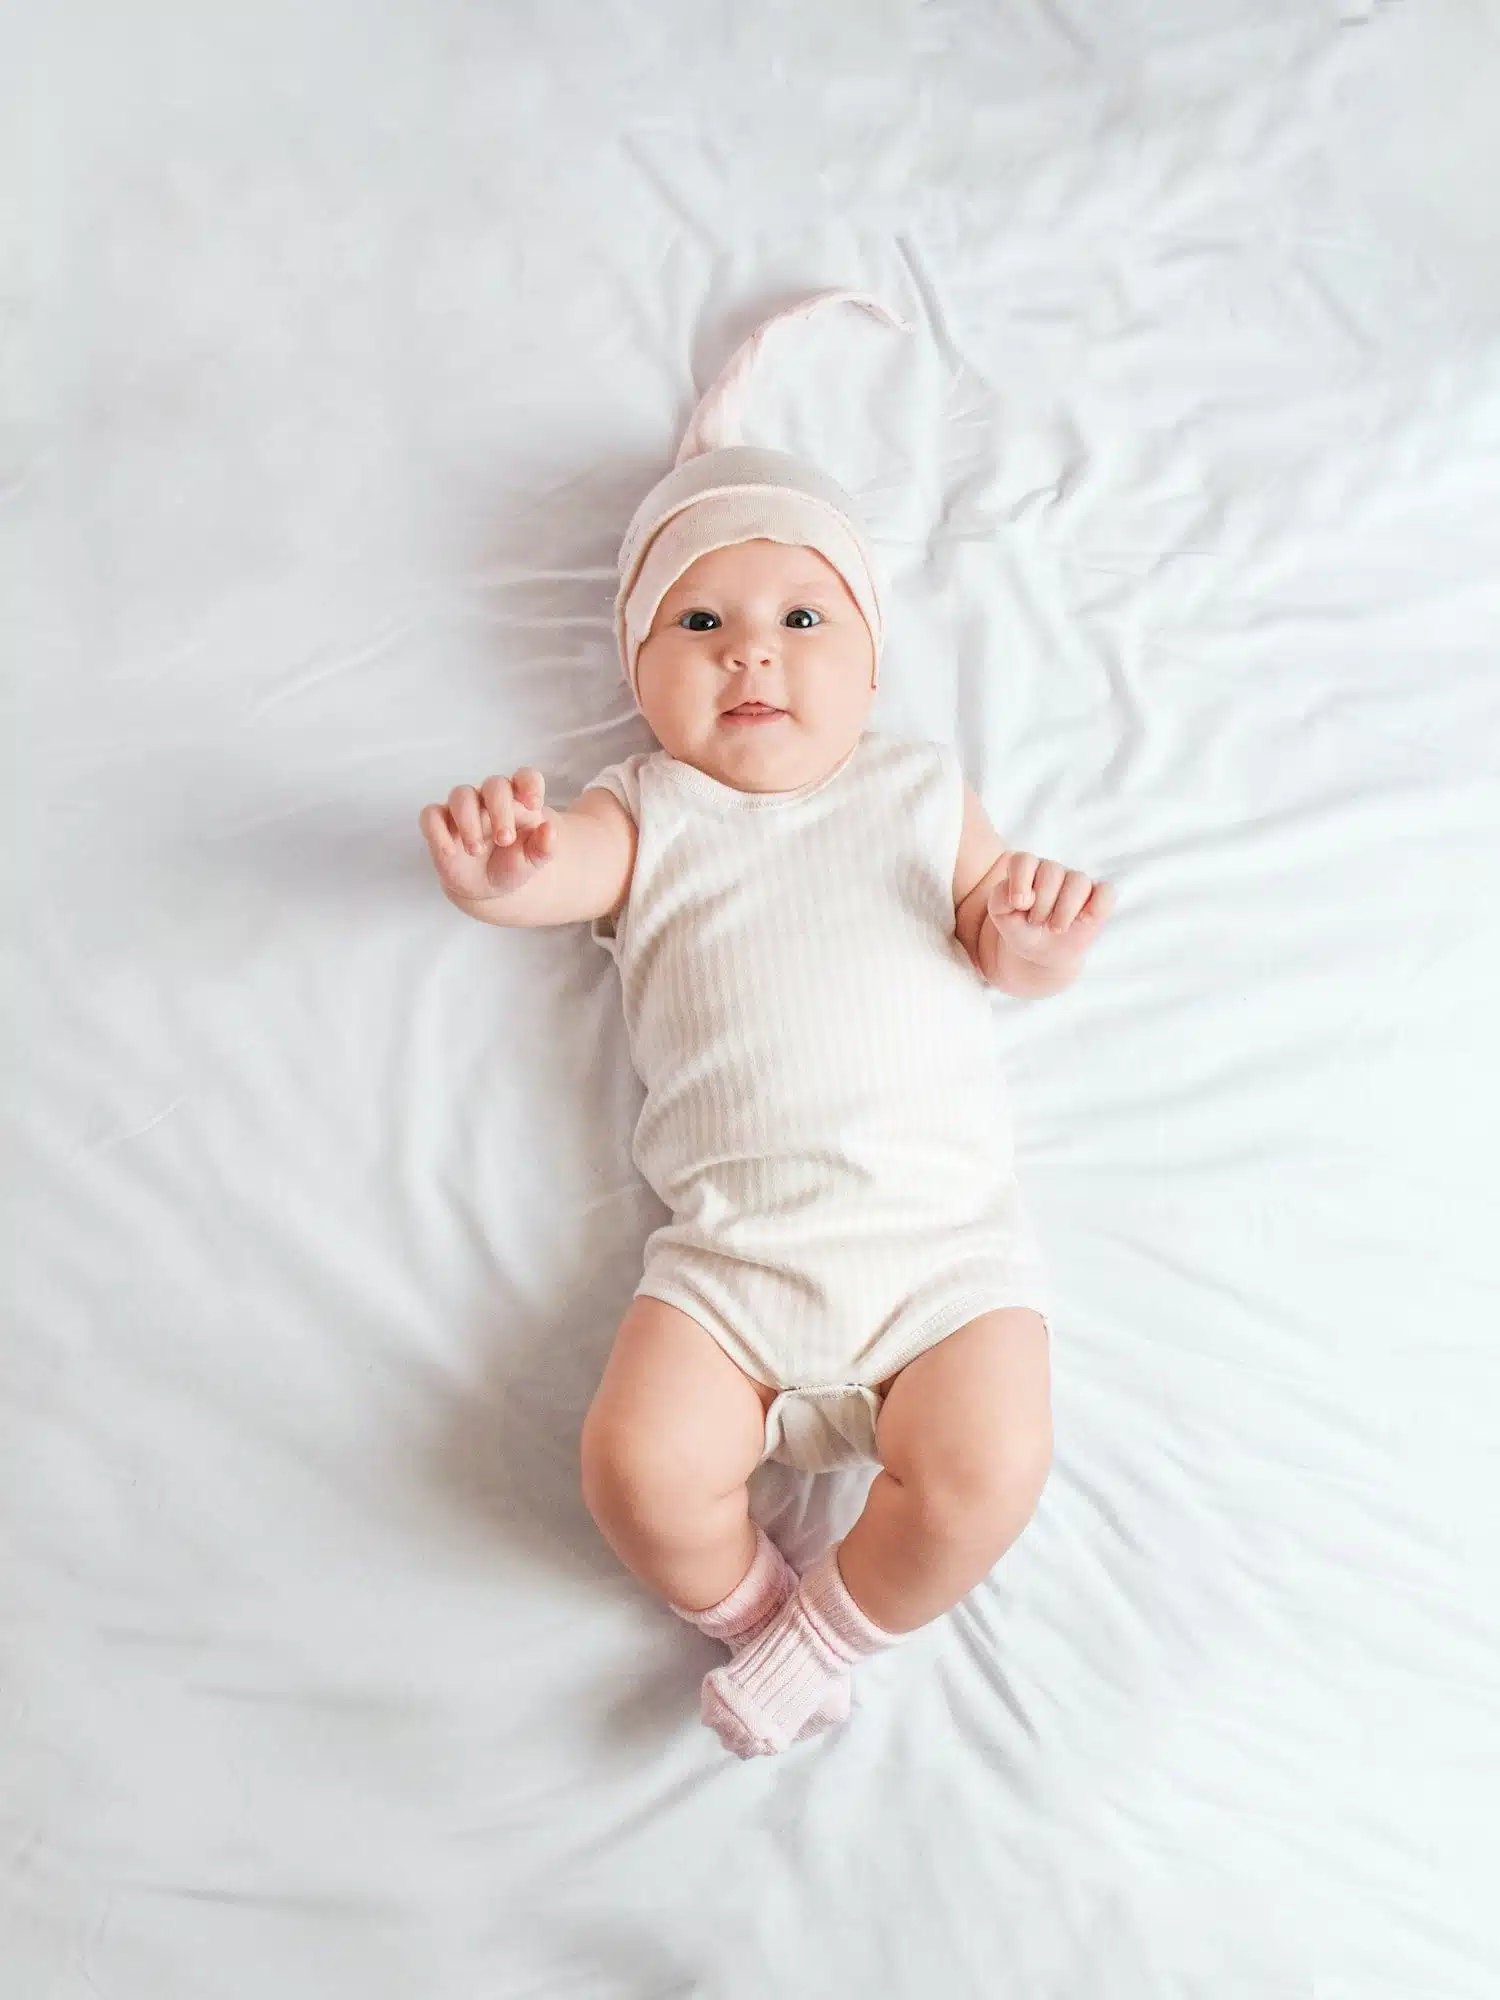 cute baby in a pink hat lies on the bed, top view